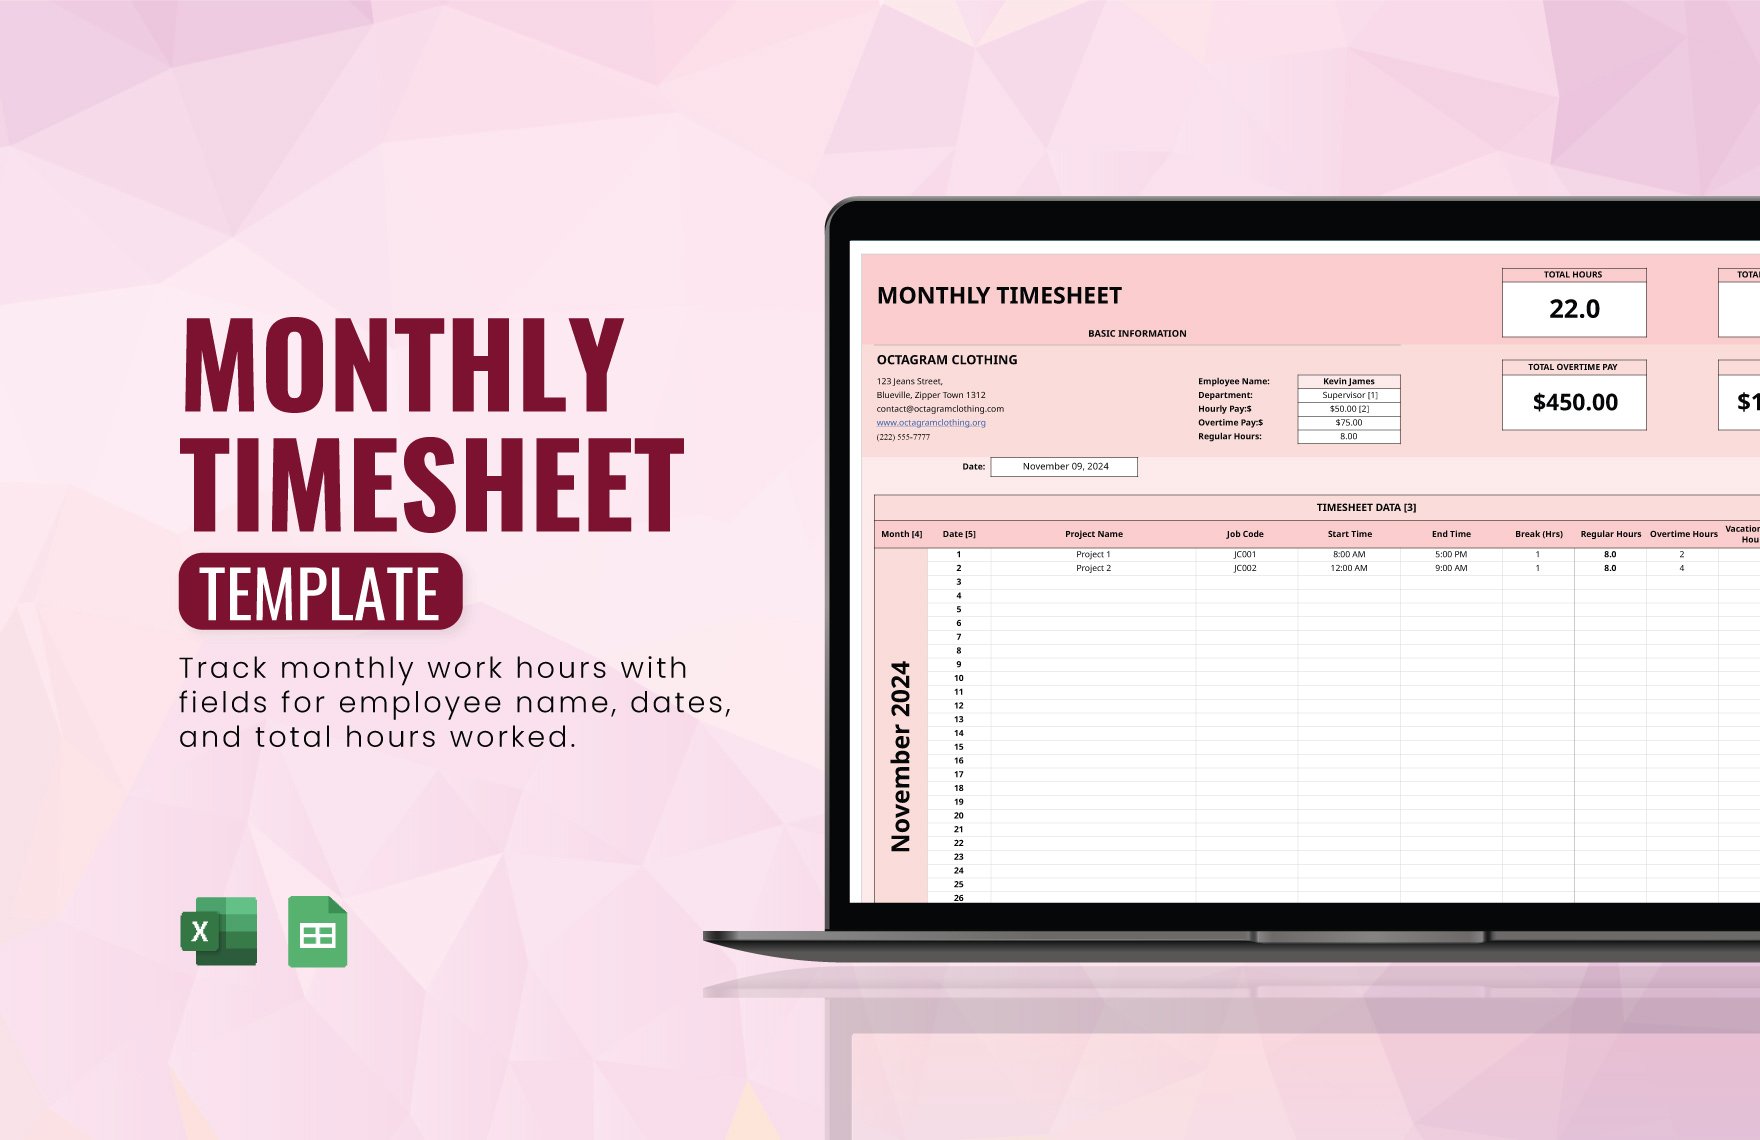 Free Monthly Timesheet Template in Excel, Google Sheets